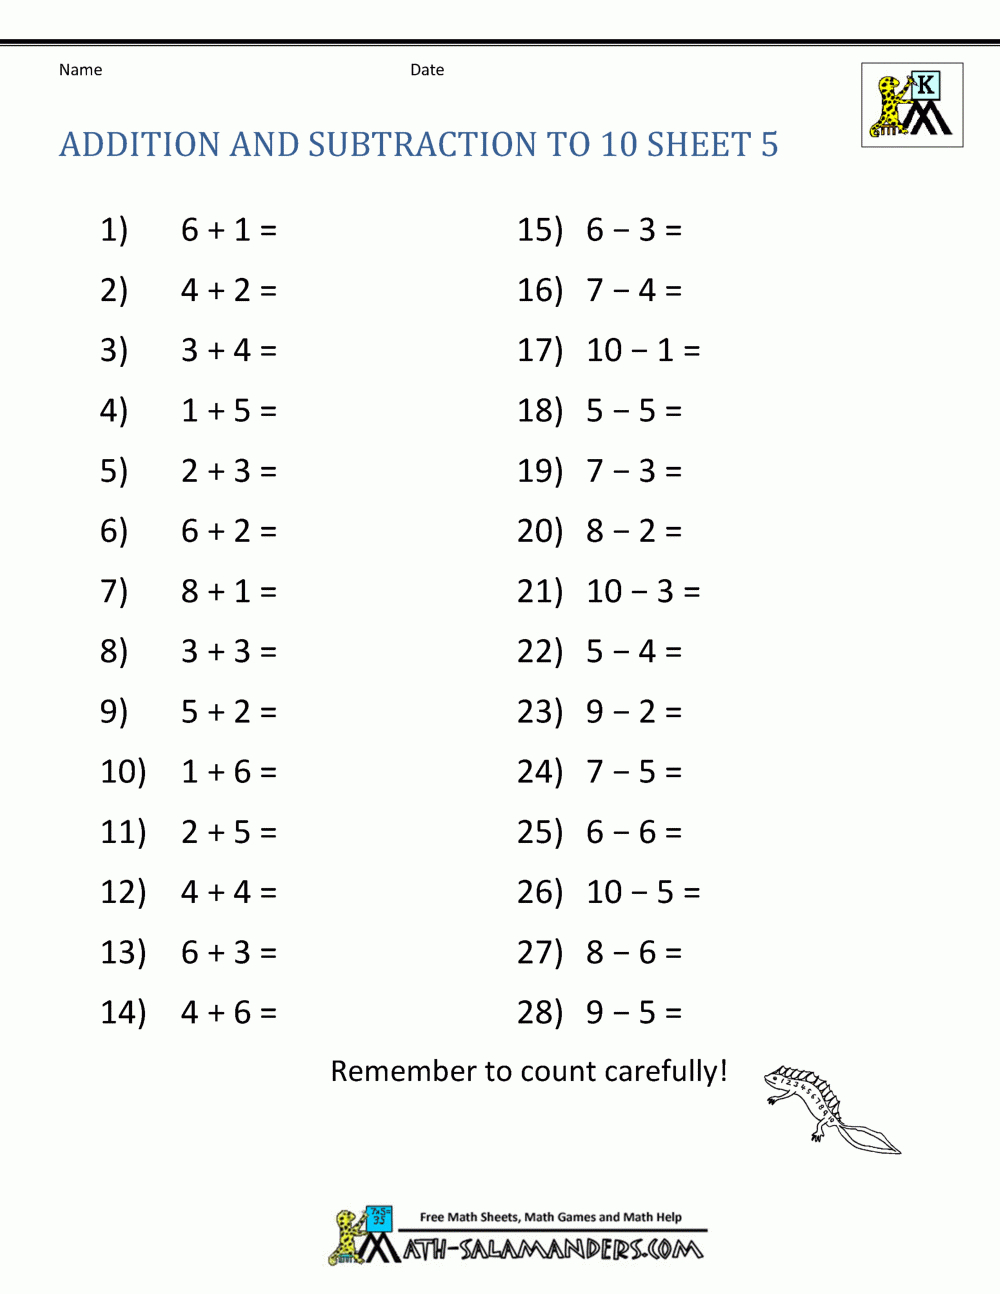 Addition And Subtraction Worksheets For Kindergarten - Free Printable Kindergarten Addition And Subtraction Worksheets